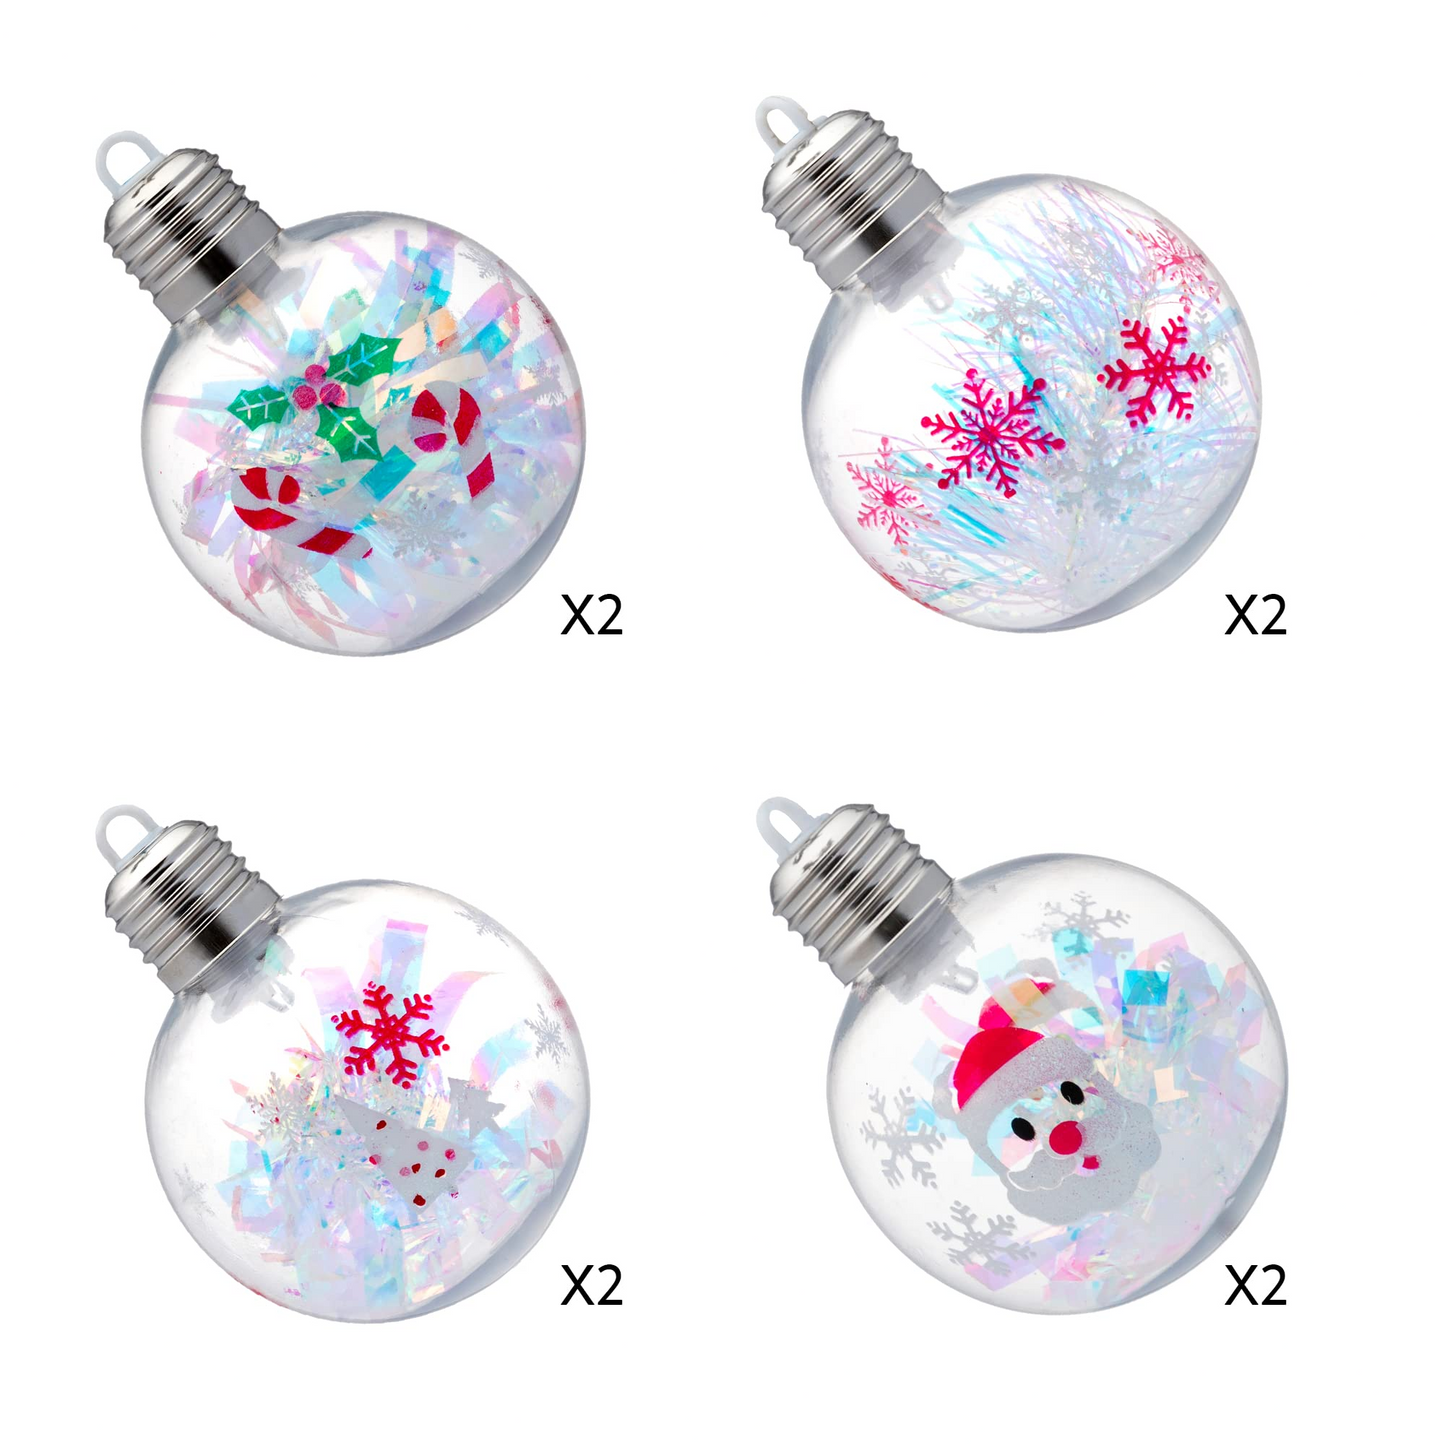 8 PcsLighted Holopaper Filling Ornaments with Cartoon Design 3.15in